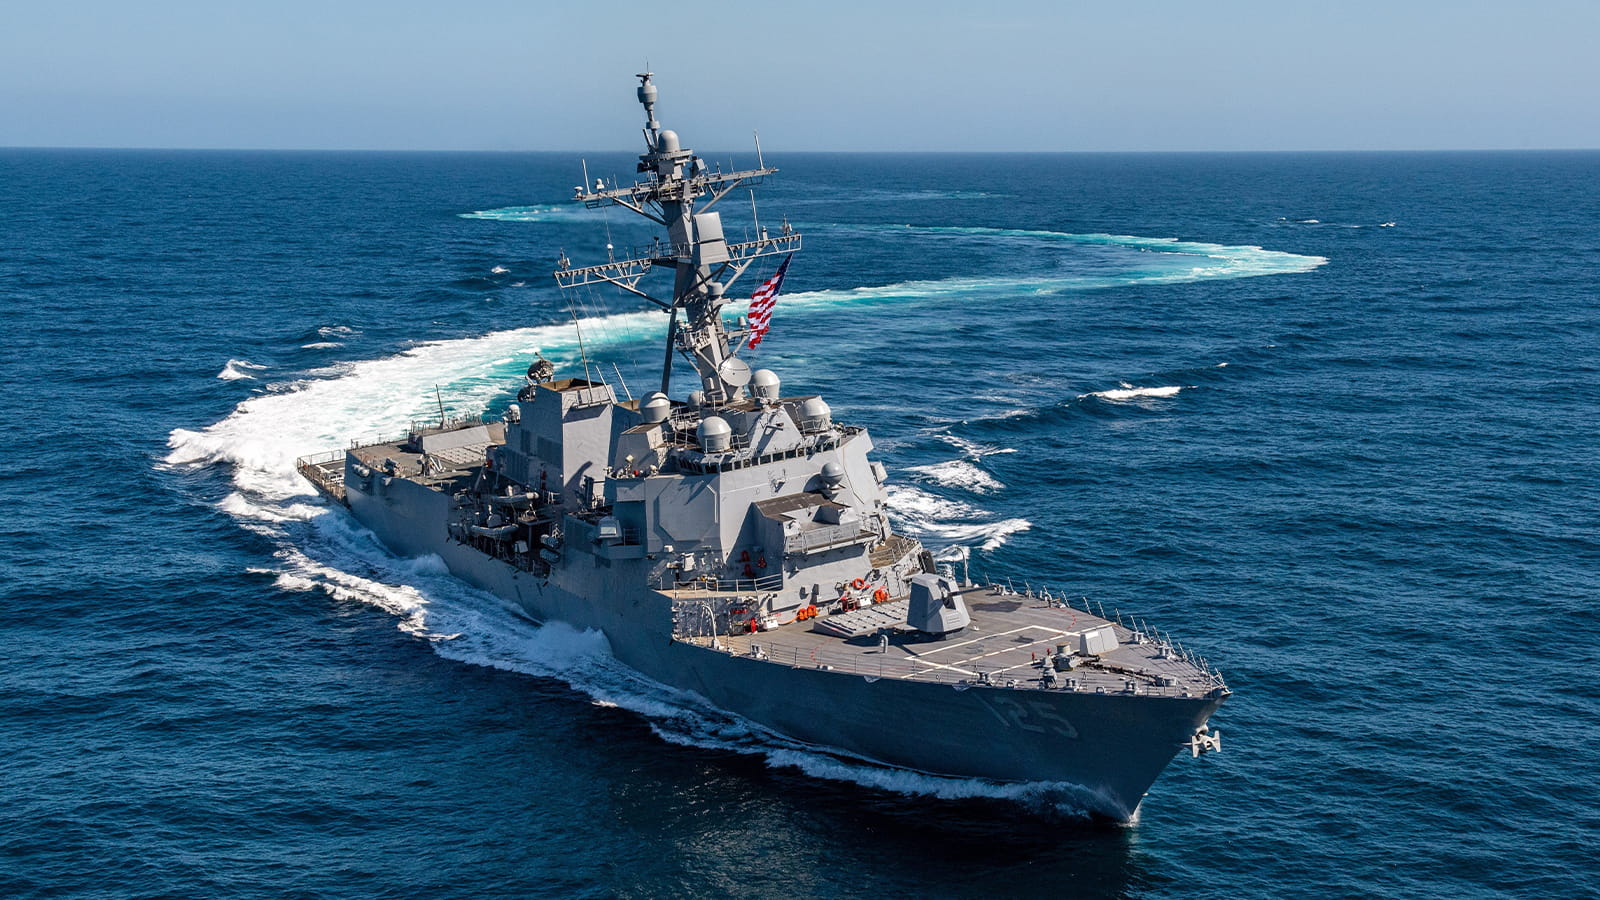 Arleigh Burke-class guided missile destroyer Jack H. Lucas (DDG 125), equipped with the SPY-6(V)1 radar, completed builder’s trials in Gulf of Mexico in April 2023. Photo credit: HII.